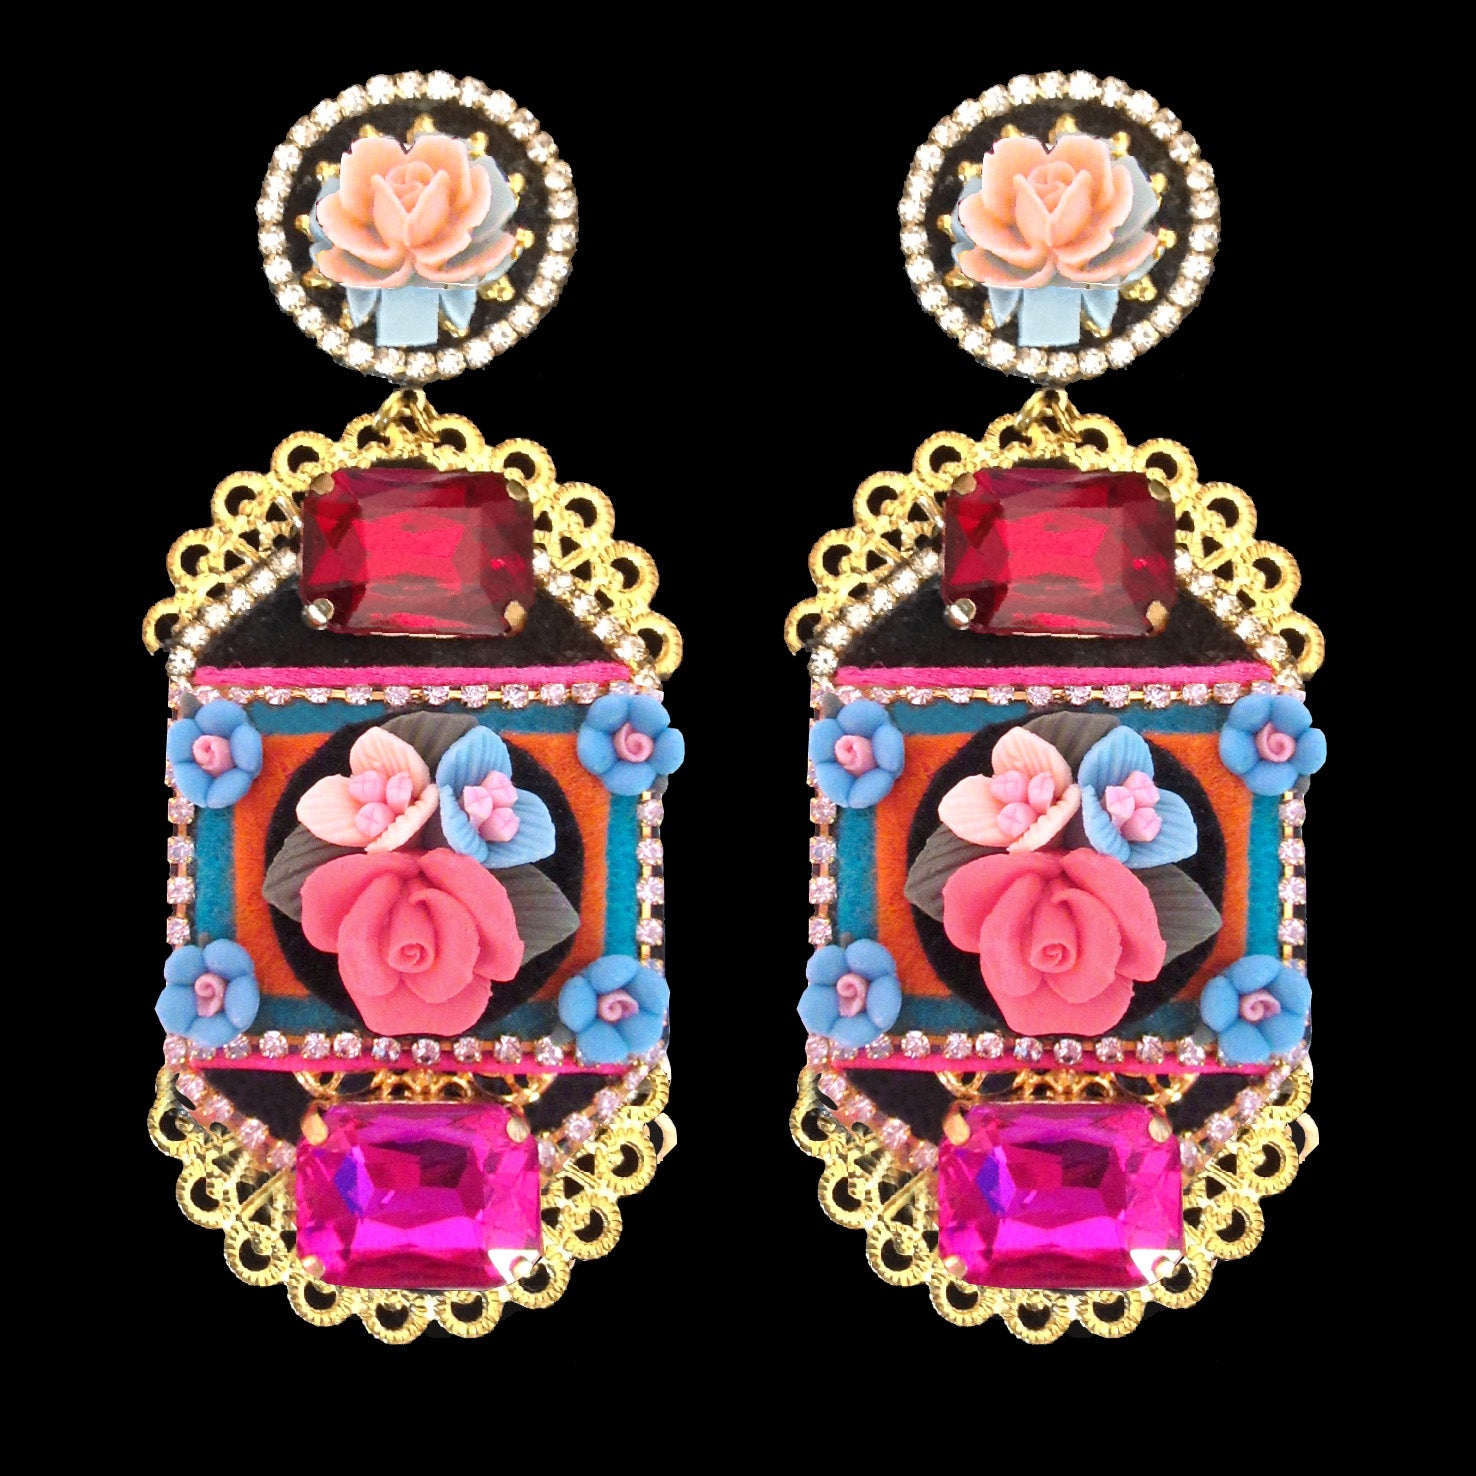 mouchkine jewelry handmade couture chic flowers earrings